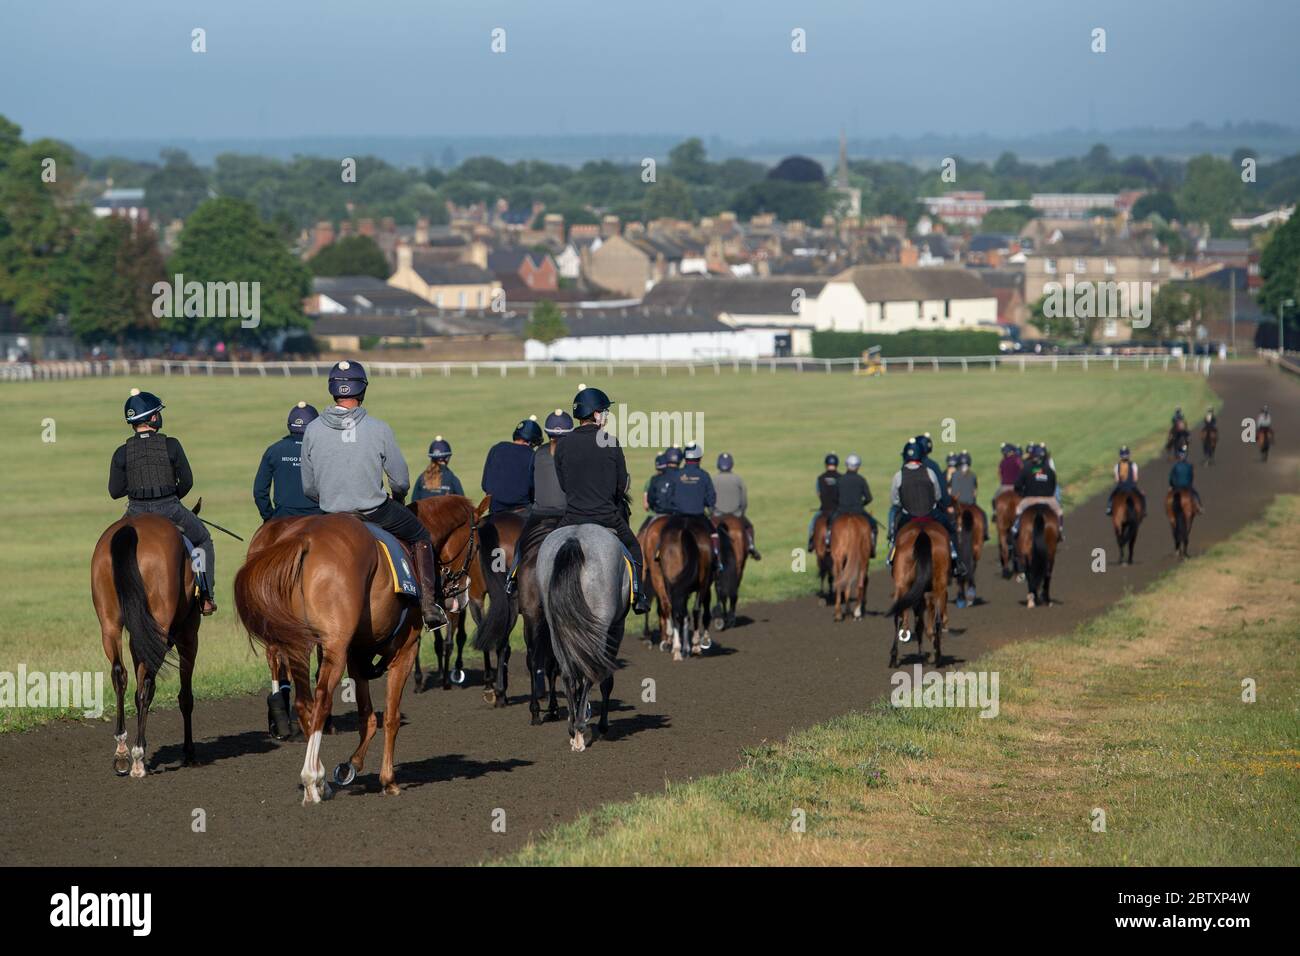 Racehorses on the gallops at Newmarket. Stock Photo